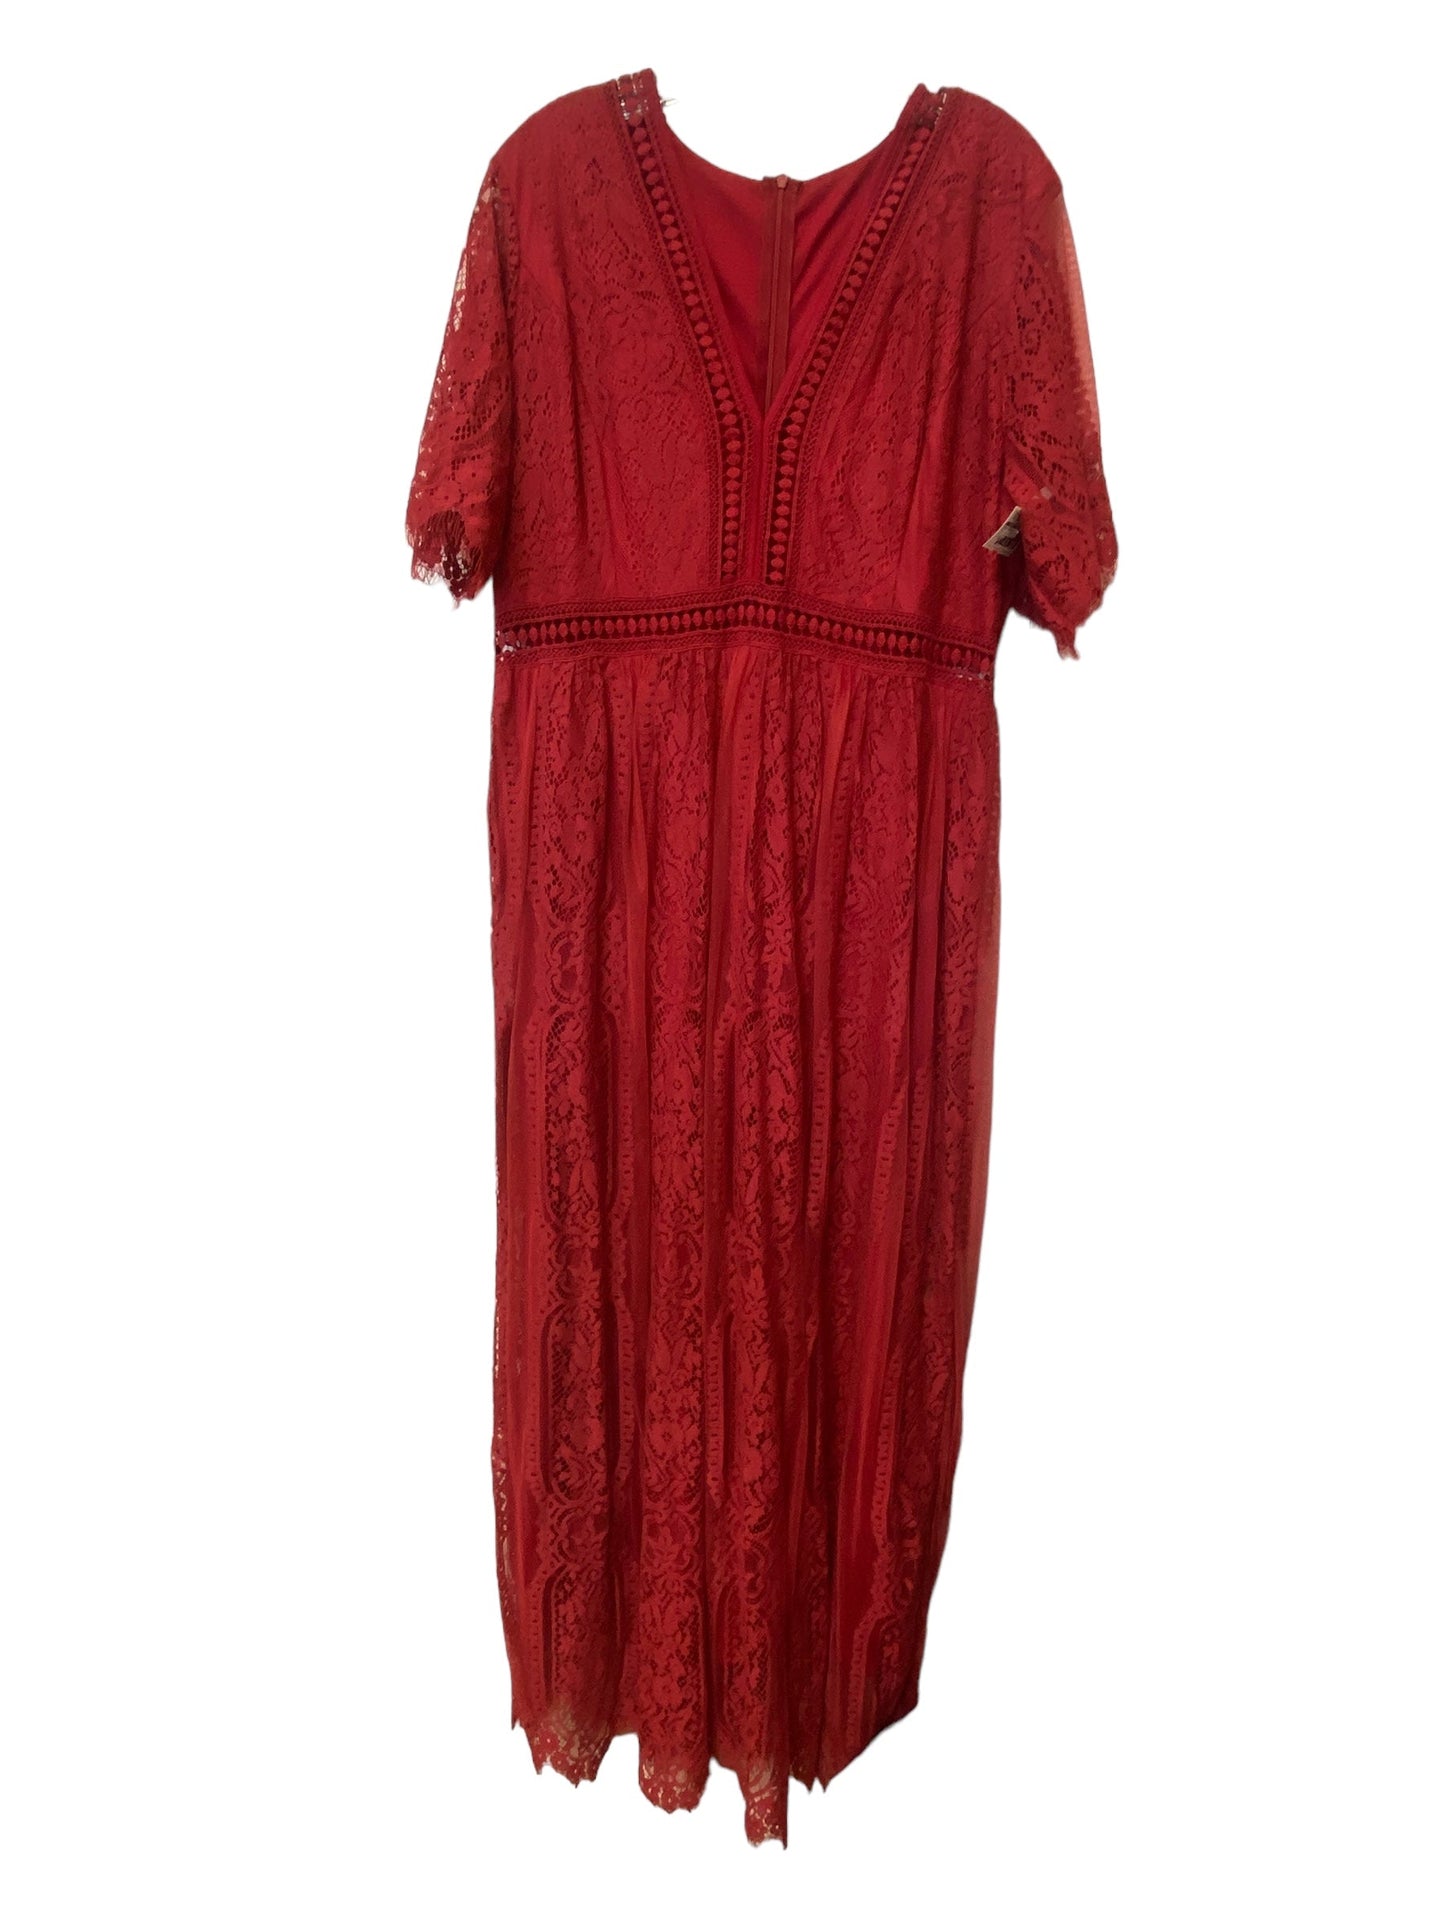 Red Dress Casual Maxi Clothes Mentor, Size 2x